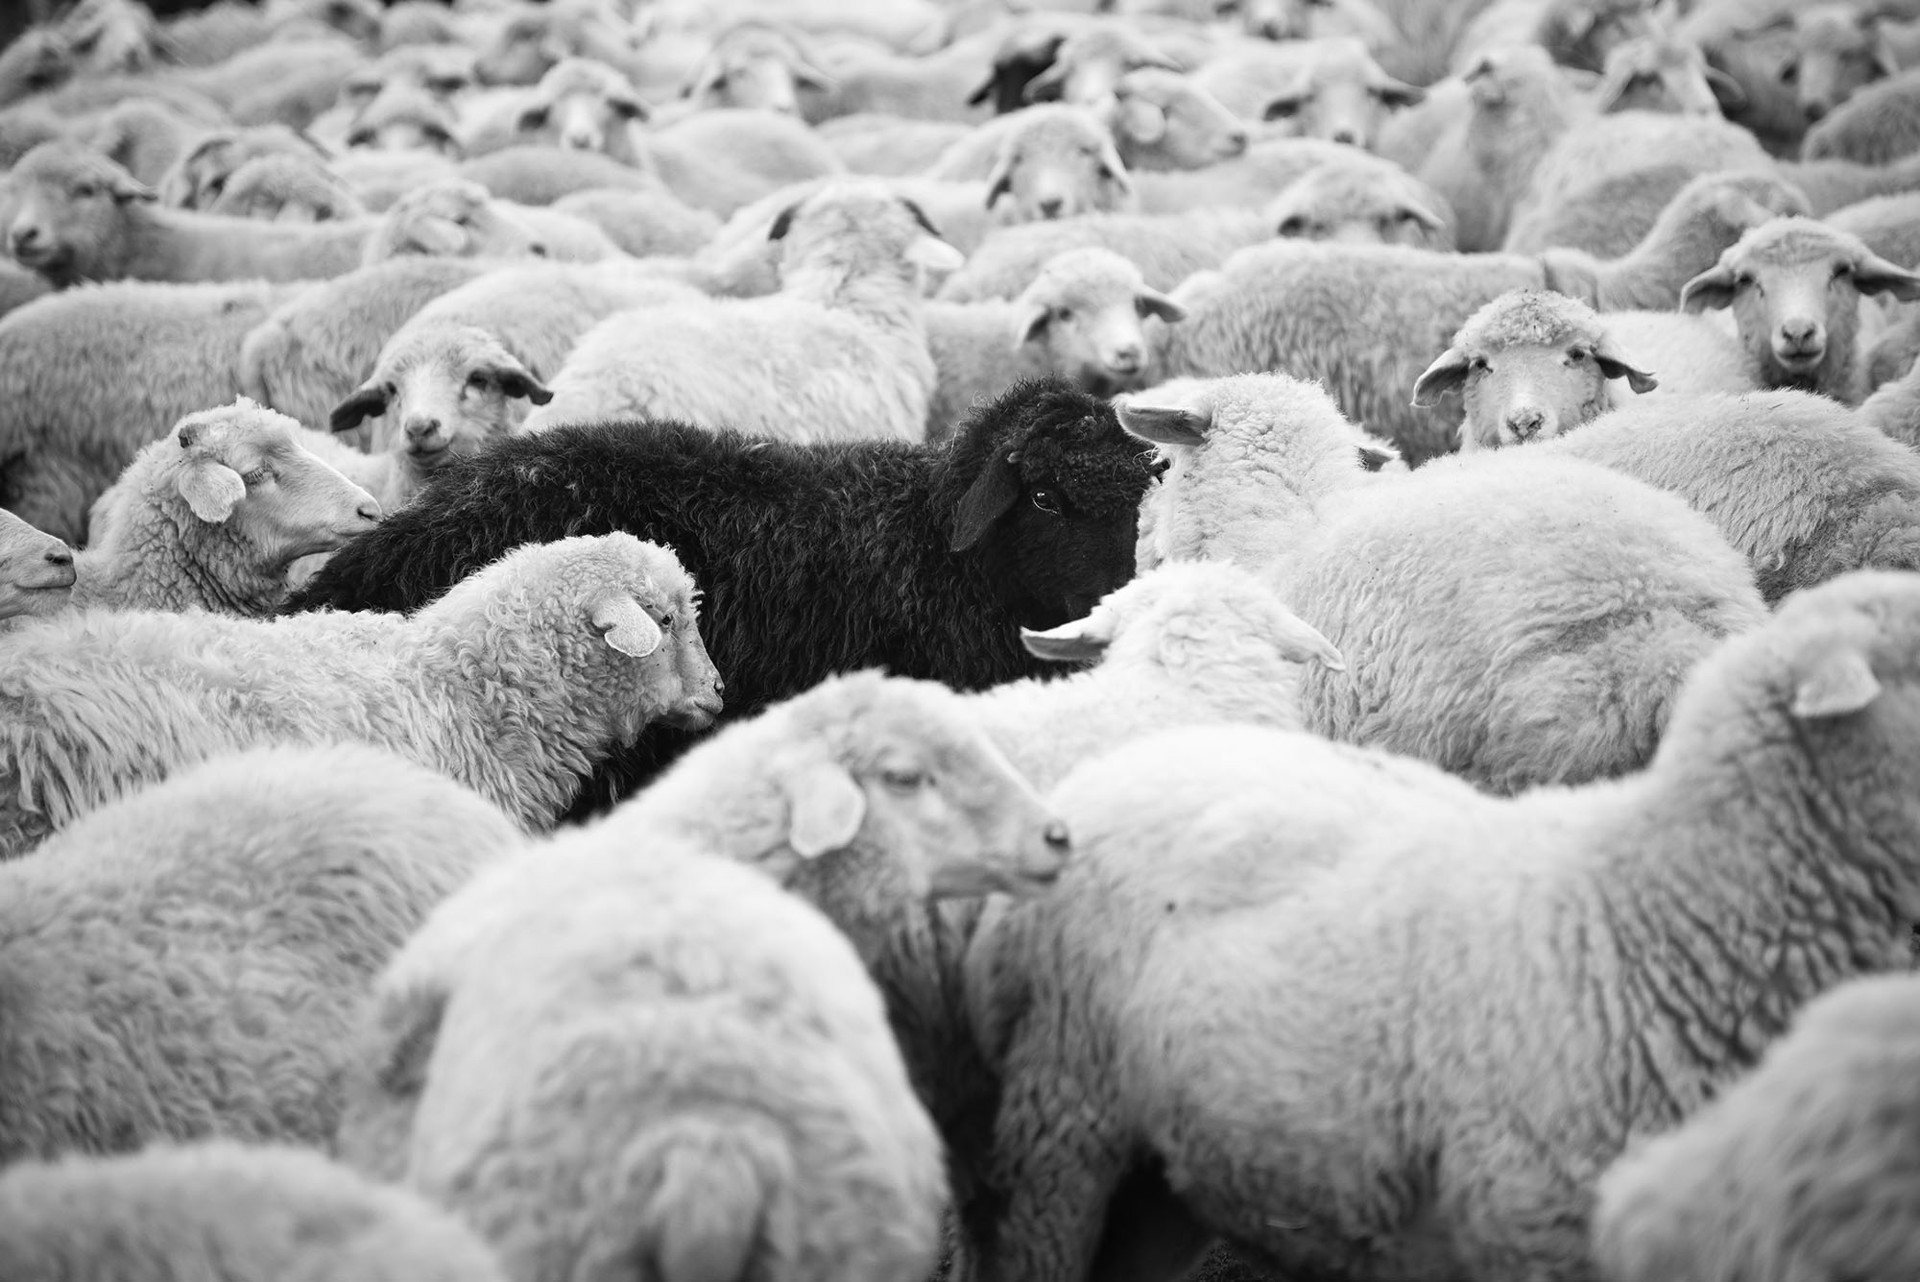 Black Sheep and Flock 2 by Philip Holsinger